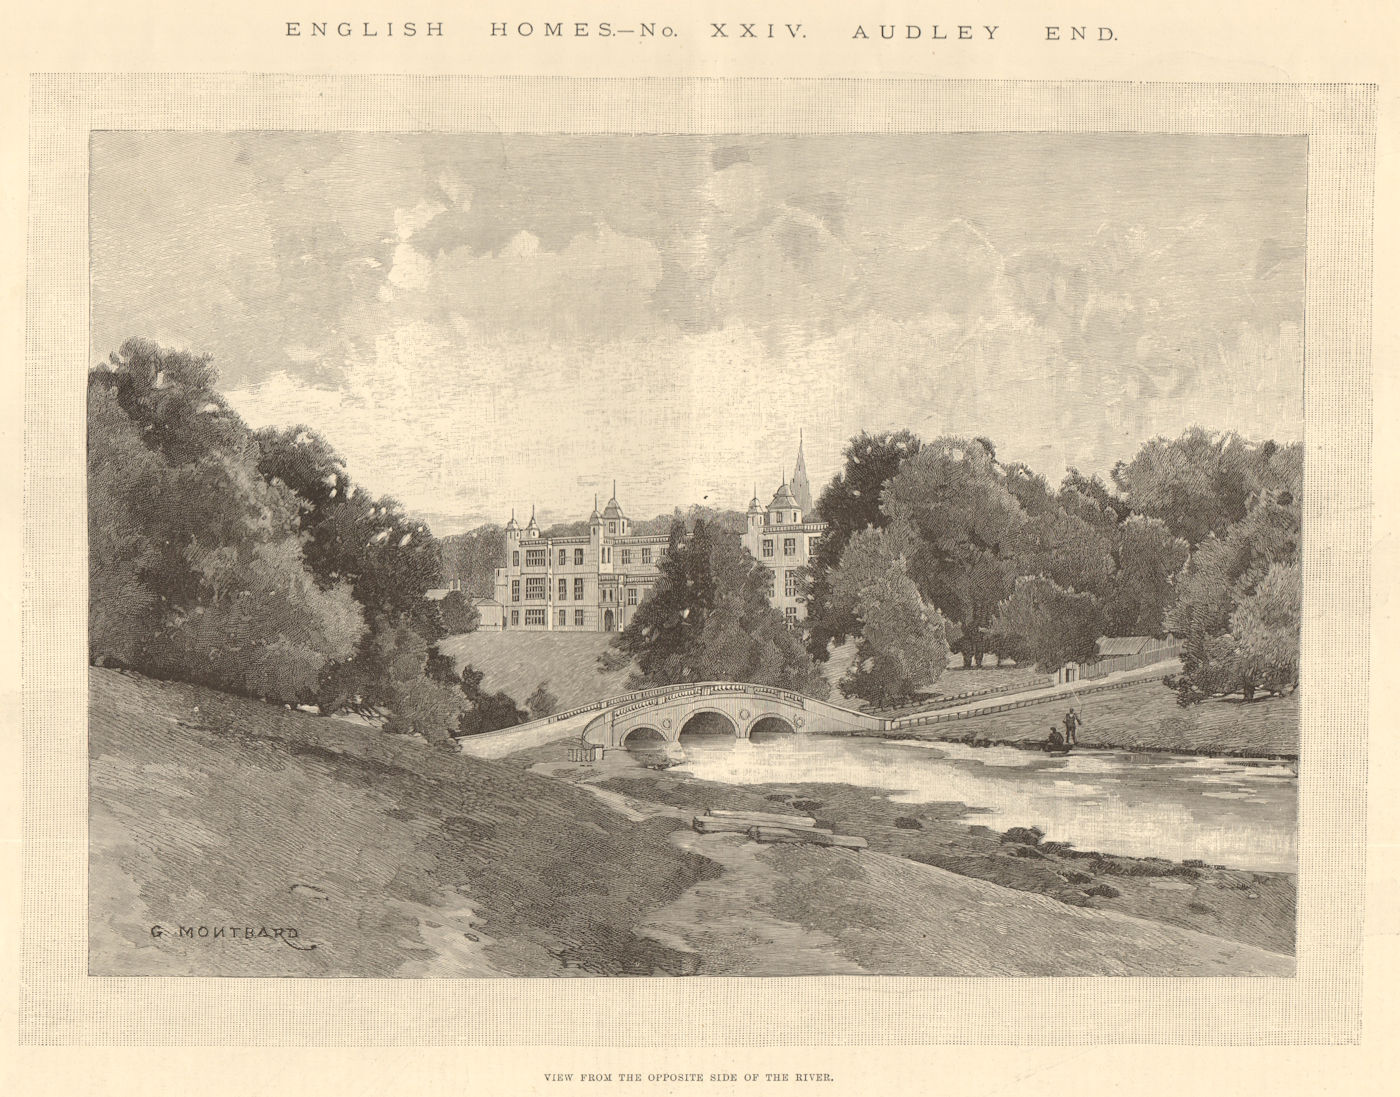 Associate Product Audley End from the opposite side of the river. Essex. Historic Houses 1890